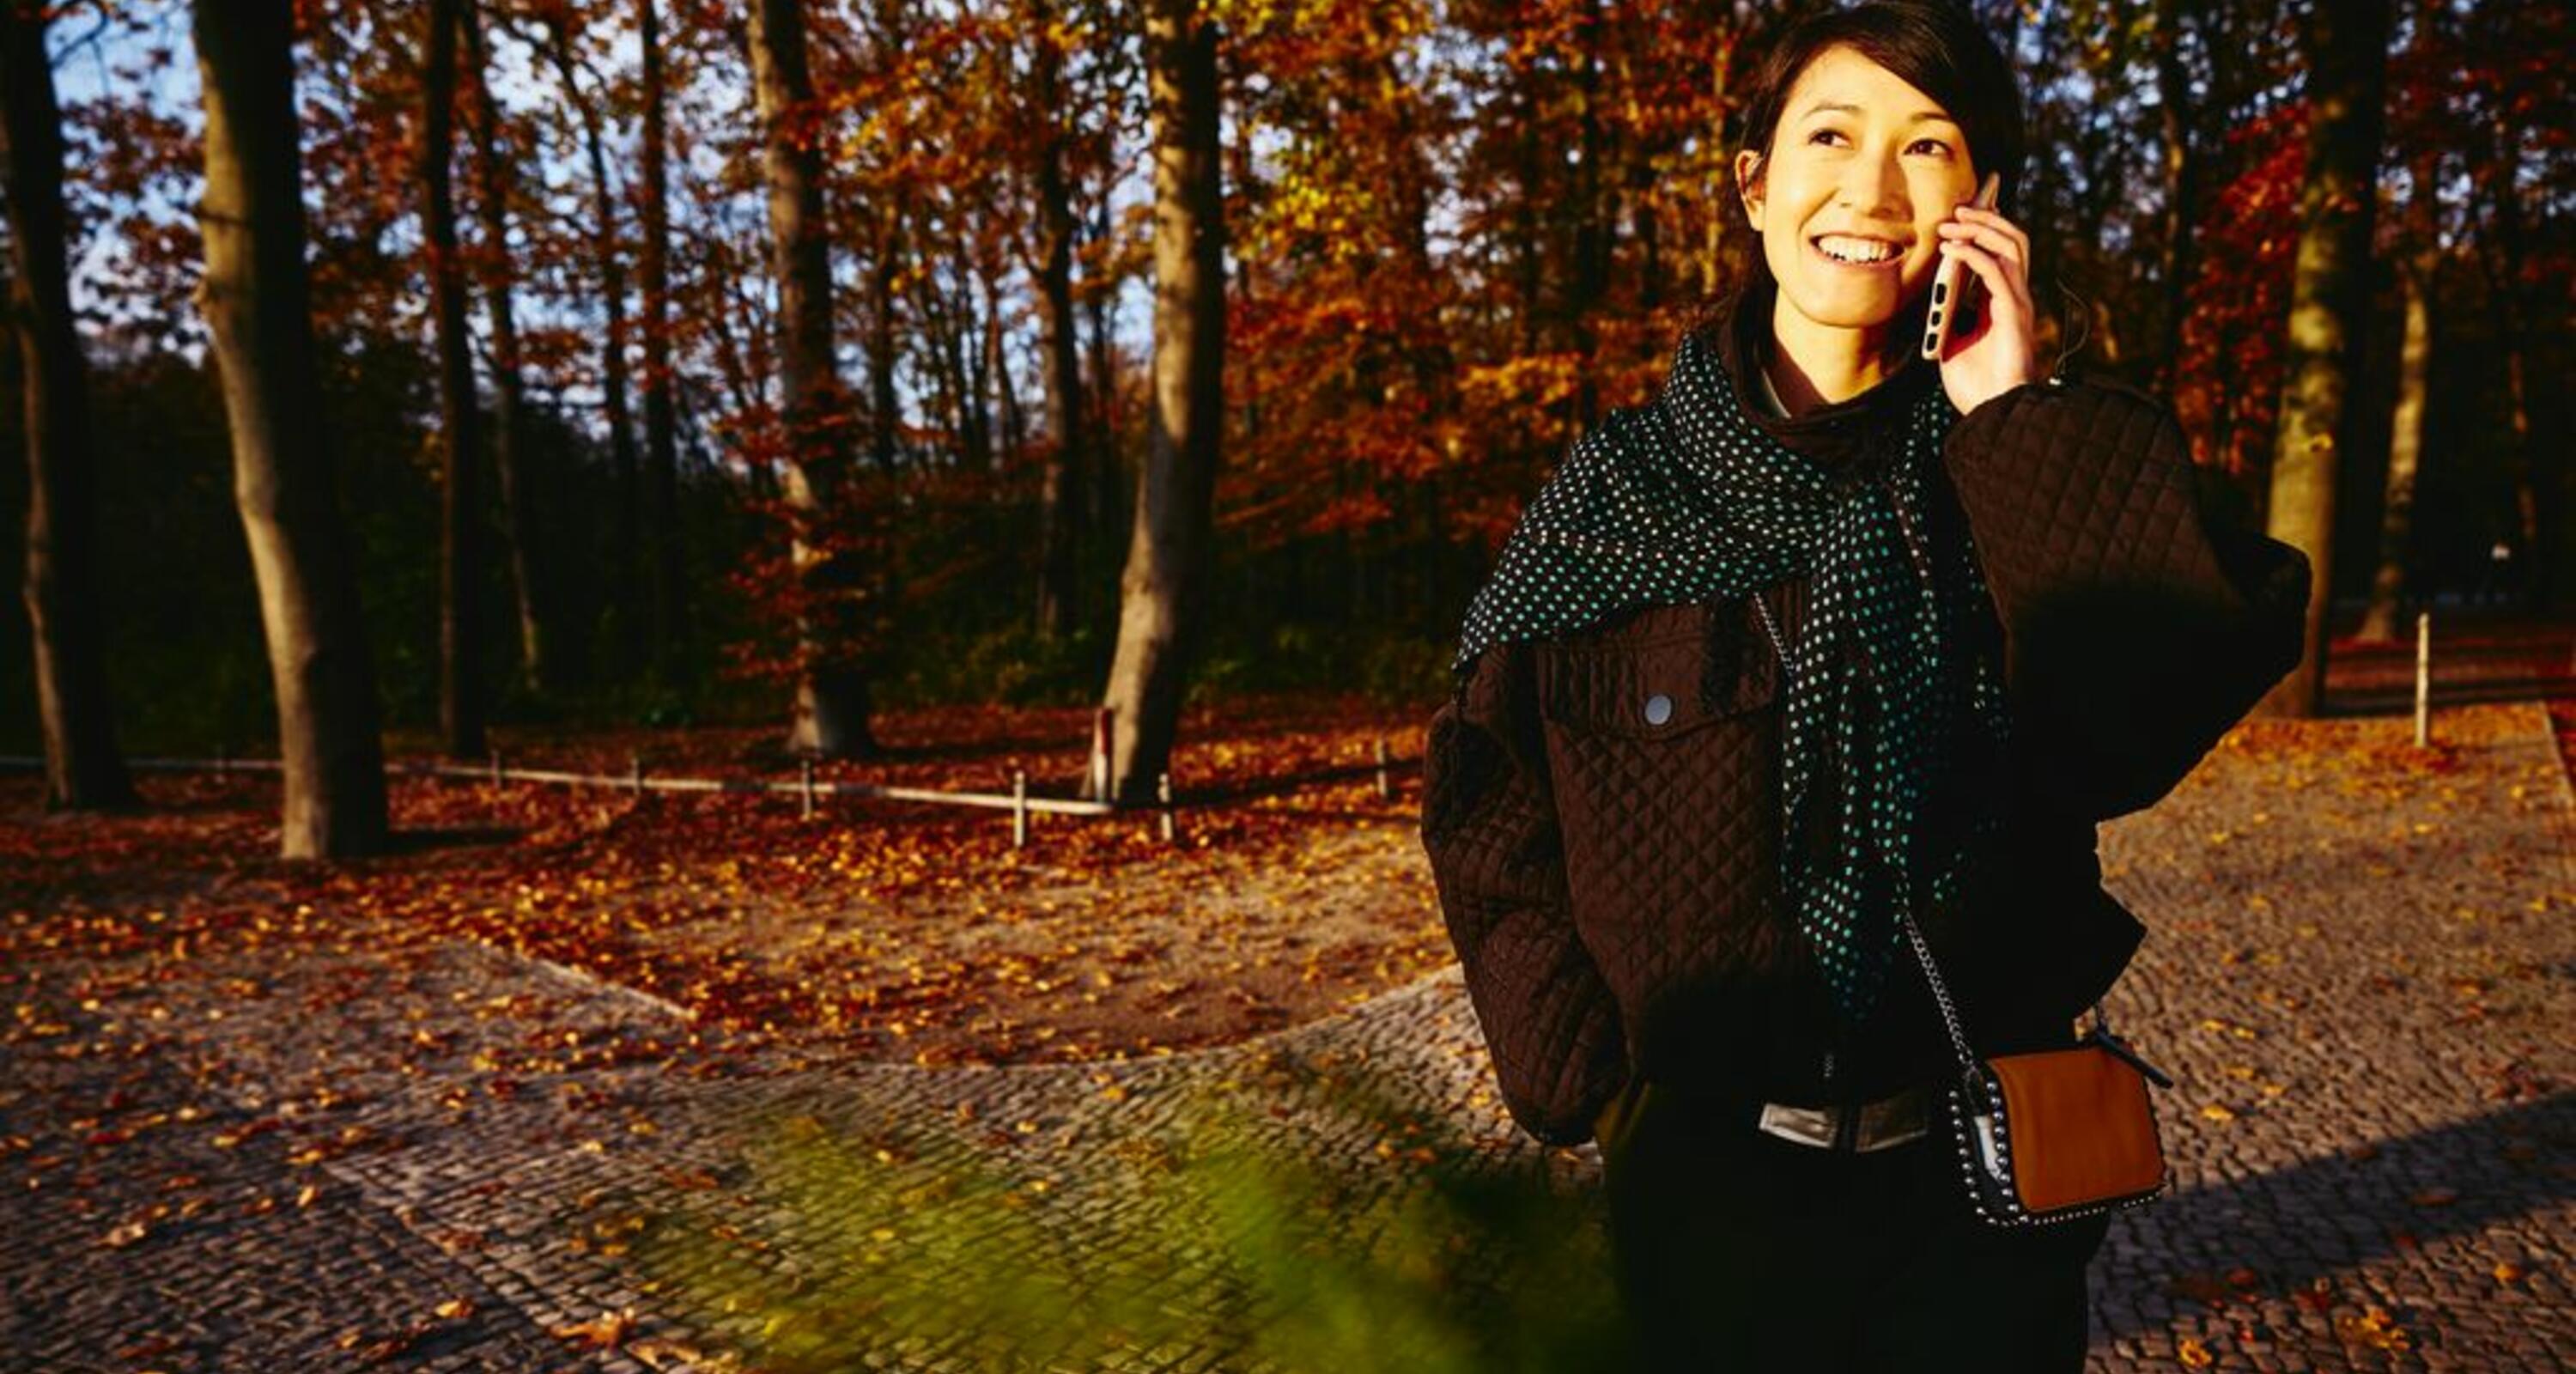 Smiling woman on the phone, autumn trees on background.